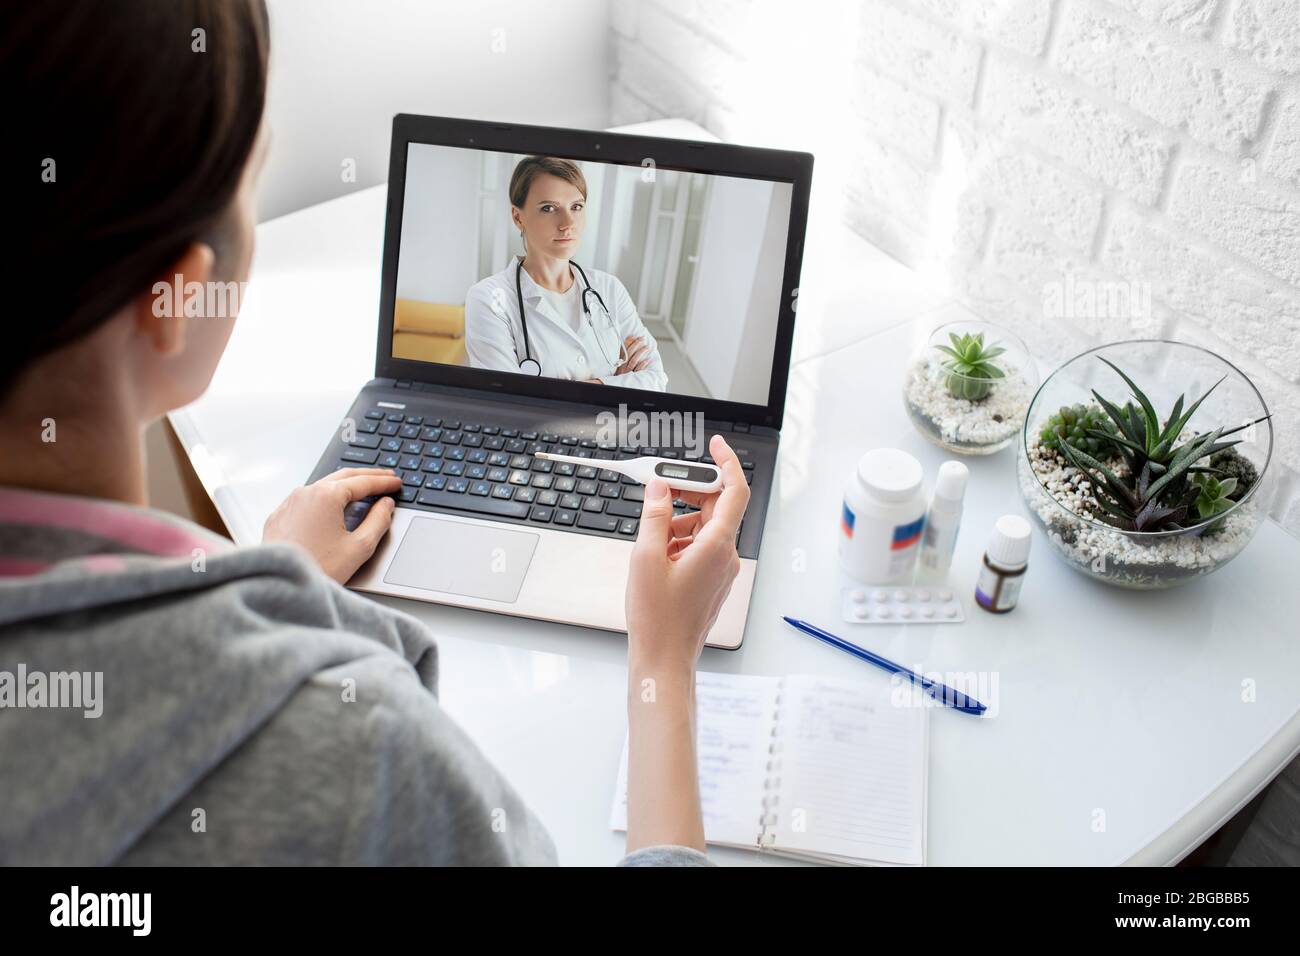 A woman with a high fever got the flu, an online consultation with her physician therapist. medical technology, video chat with a doctor Stock Photo